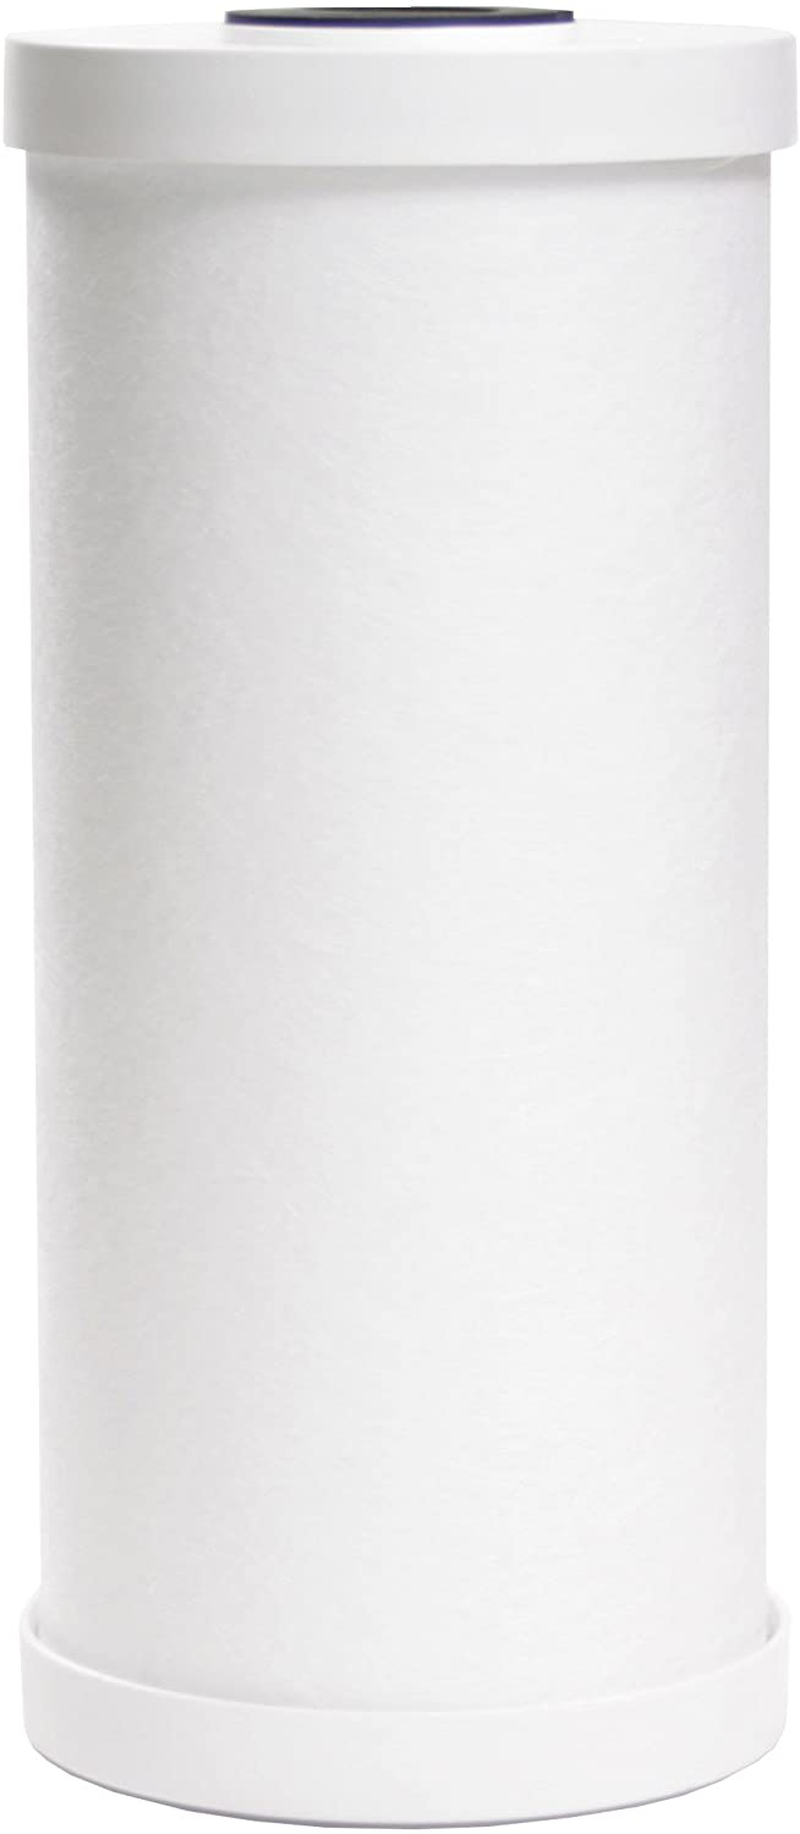 GE FXHTC Whole Home System Replacement Filter, 10.00 x 4.00 x 4.00 inches